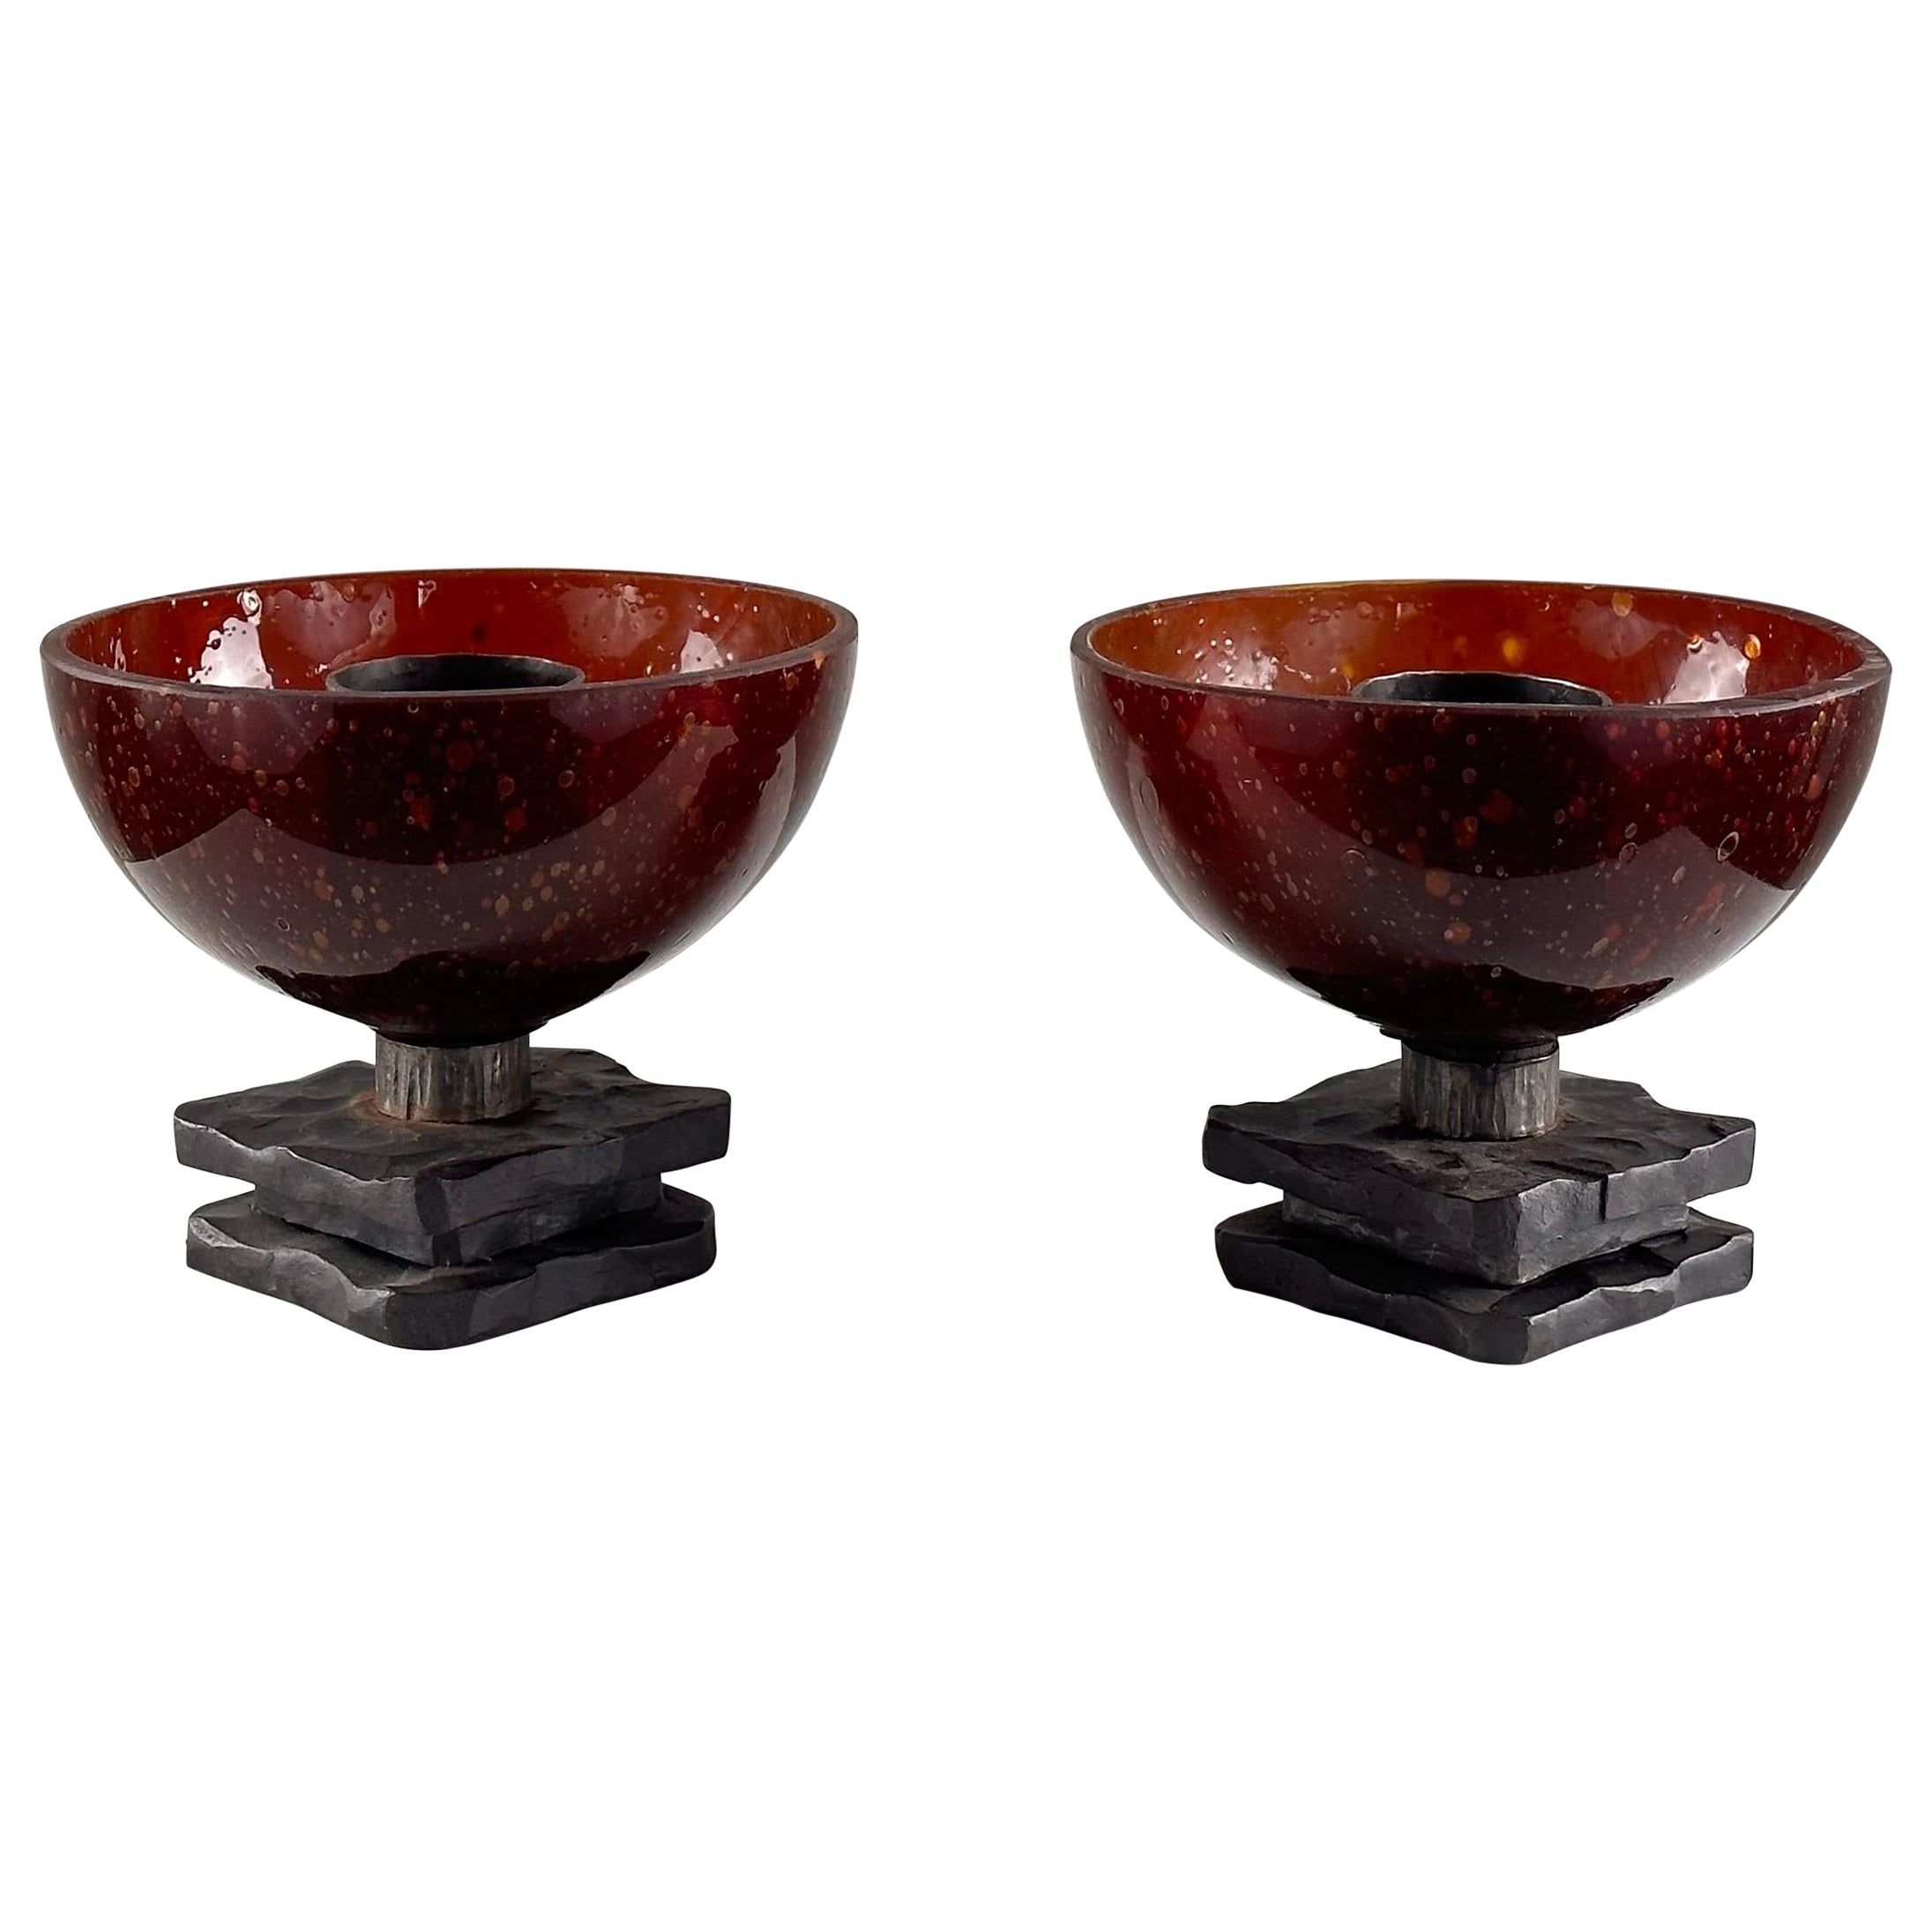 1960s Murano Brutalist Candle Holders, A Pair of Striking Artisanal Creations For Sale